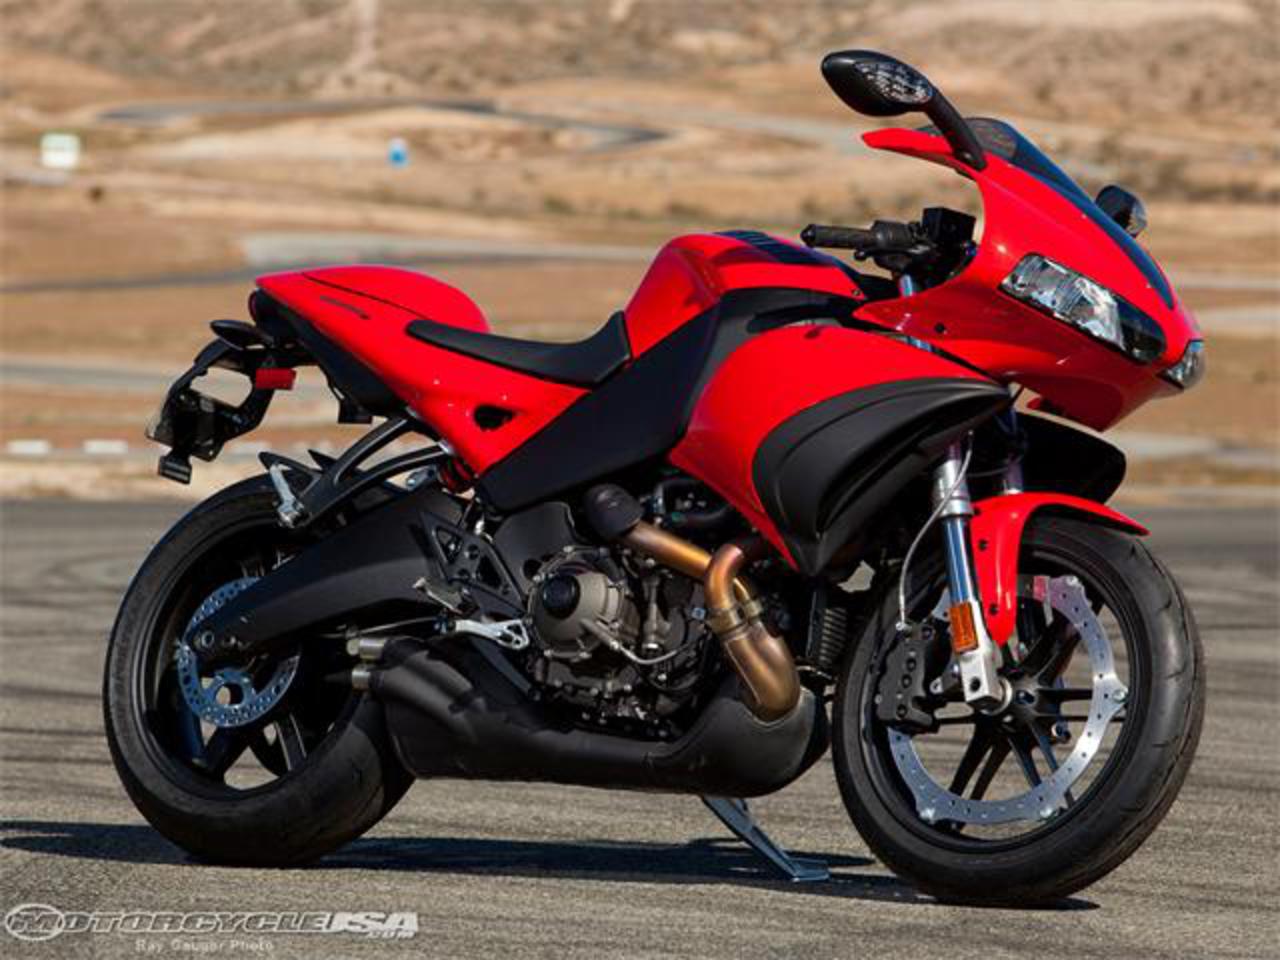 2009 Buell 1125R DSB Comparison Photo Gallery - Motorcycle USA